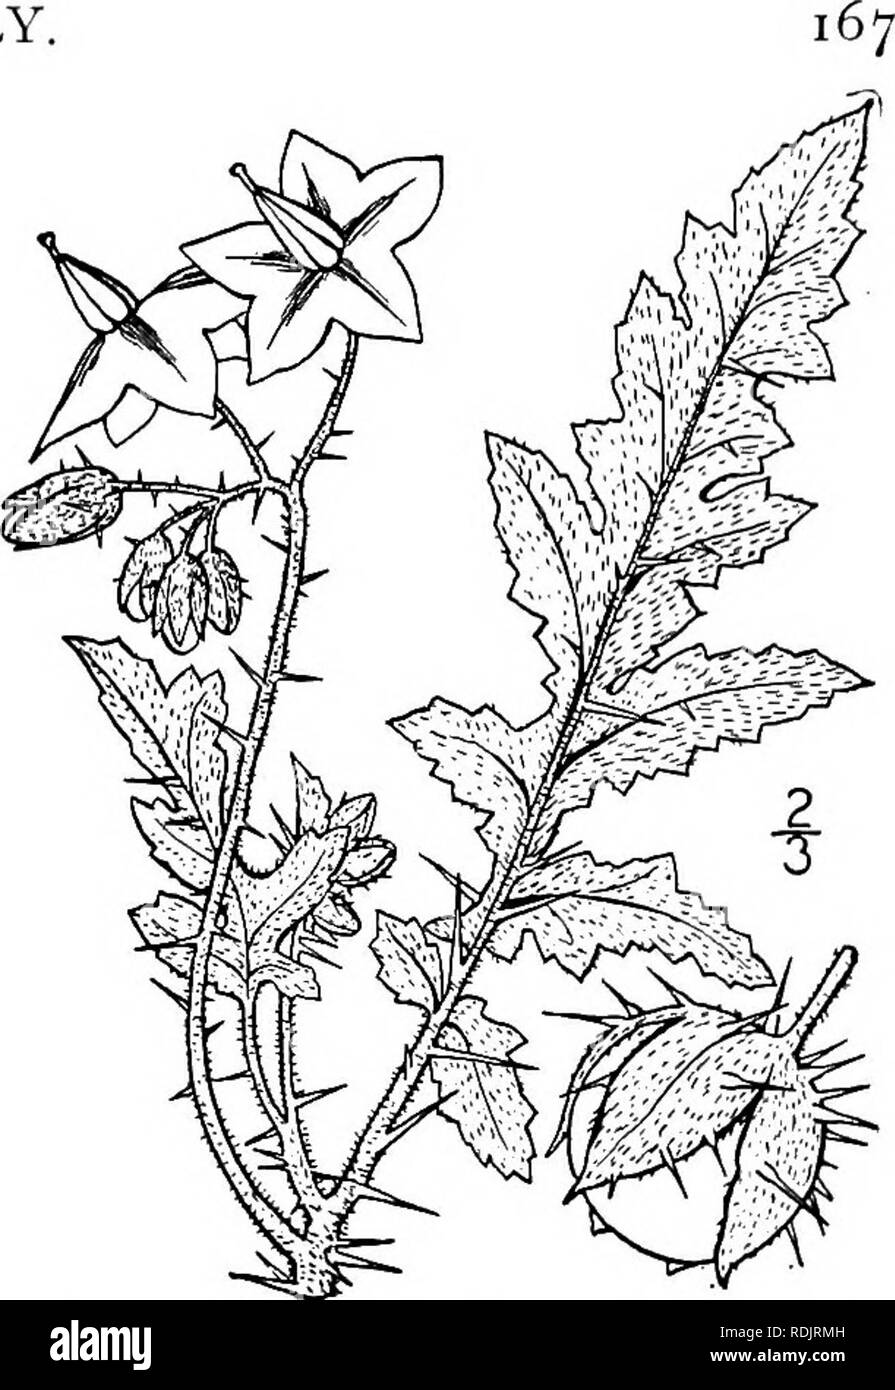 . An illustrated flora of the northern United States, Canada and the British possessions, from Newfoundland to the parallel of the southern boundary of Virginia, and from the Atlantic Ocean westward to the 102d meridian. Botany; Botany. Genus 6. POTATO FAMILY. 8. Solatium sisymbriifolium Lam. Viscid Nightshade. Fig. 3724. Solatium sisymbriifolium Lam. 111. 2: 25. 1793. Annual, branched, 2°-4° high, villous-pubescent with long viscid hairs and armed all over with bright yellow prickles. Leaves thin, deeply pinnatifid into oblong toothed or sinuate lobes; flowers li'-ii' broad, light blue or whi Stock Photo